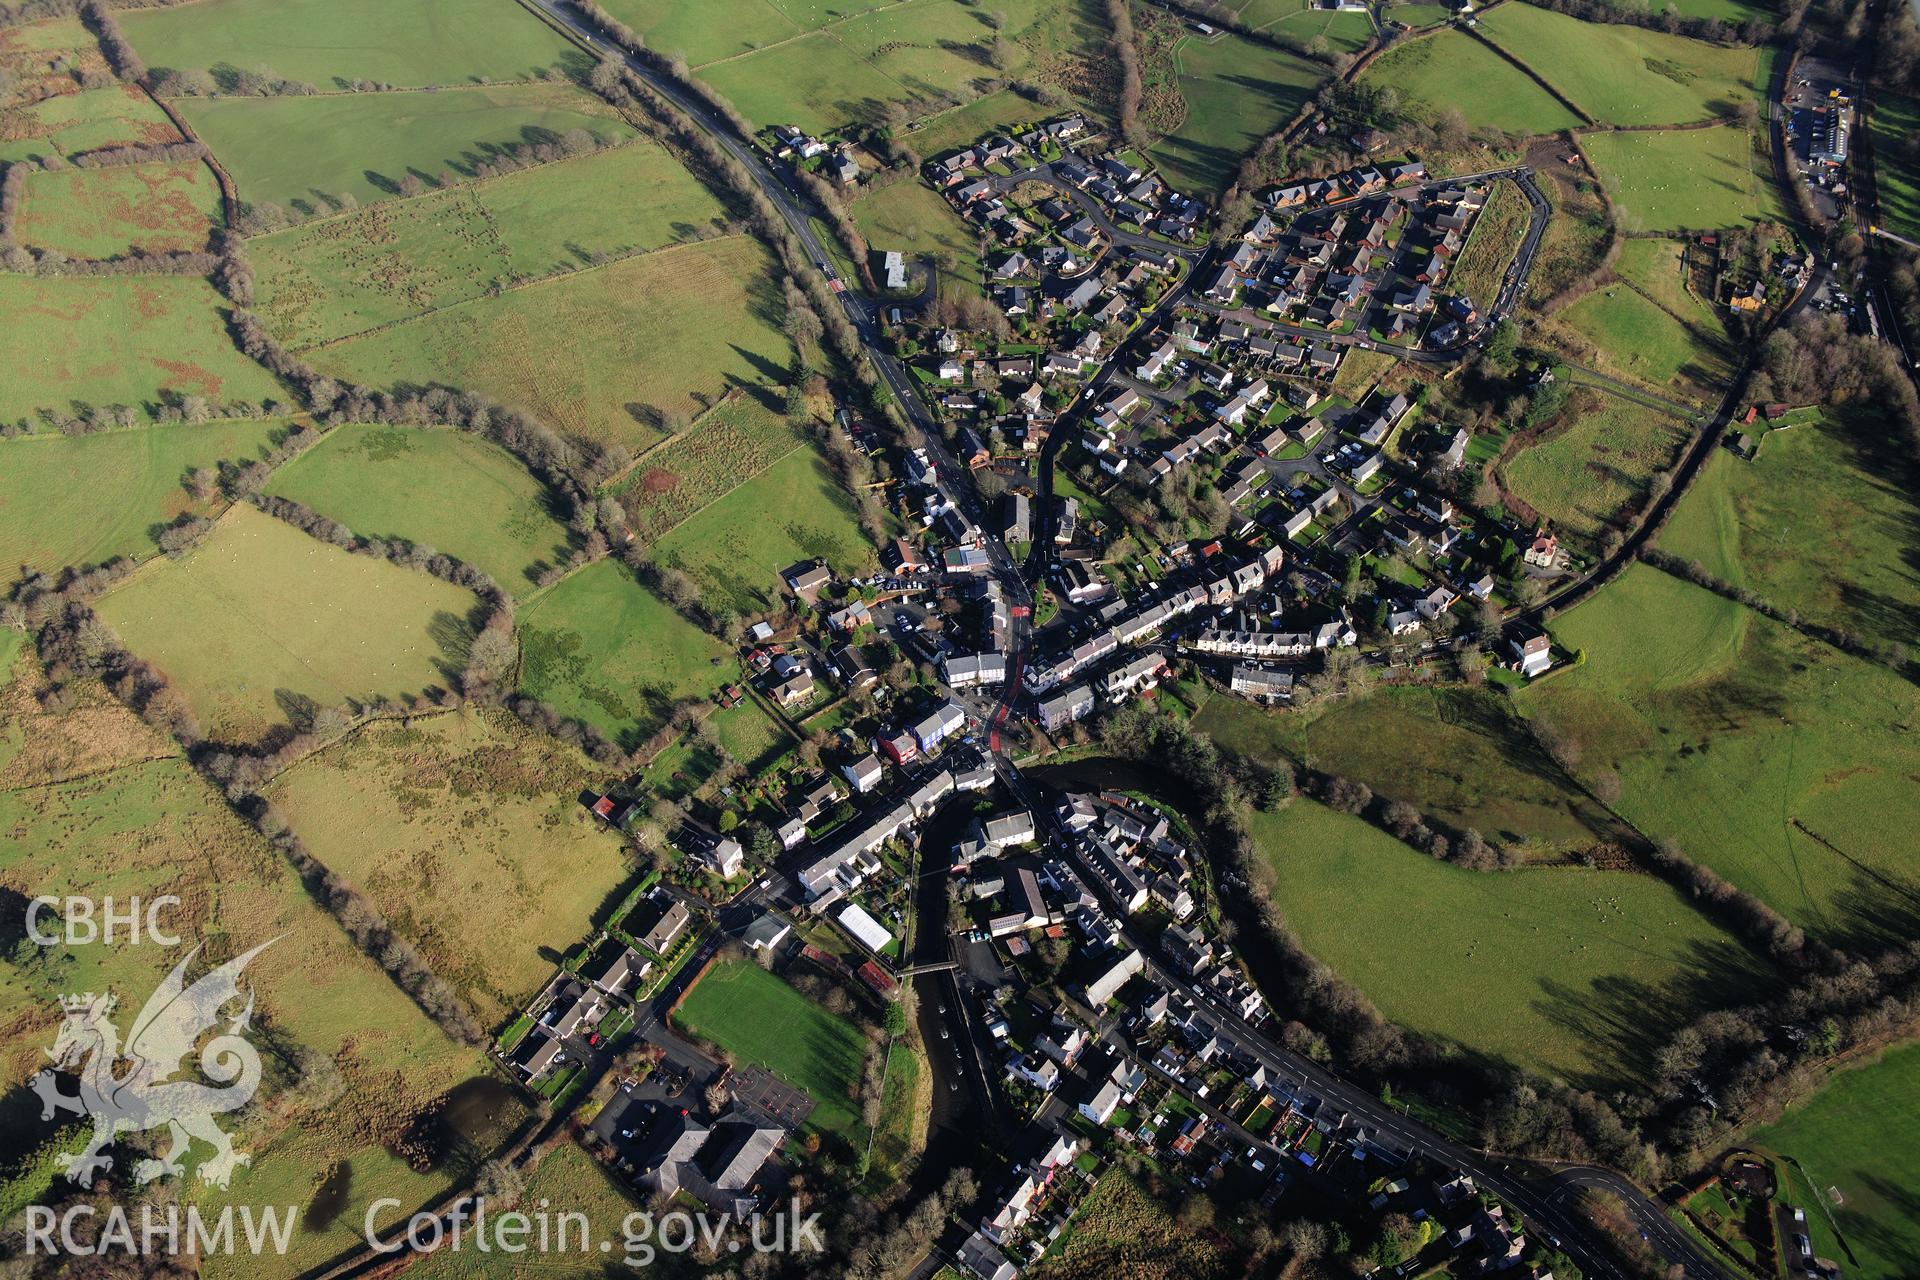 RCAHMW colour oblique photograph of Llanwrtyd Wells, town. Taken by Toby Driver on 23/11/2012.